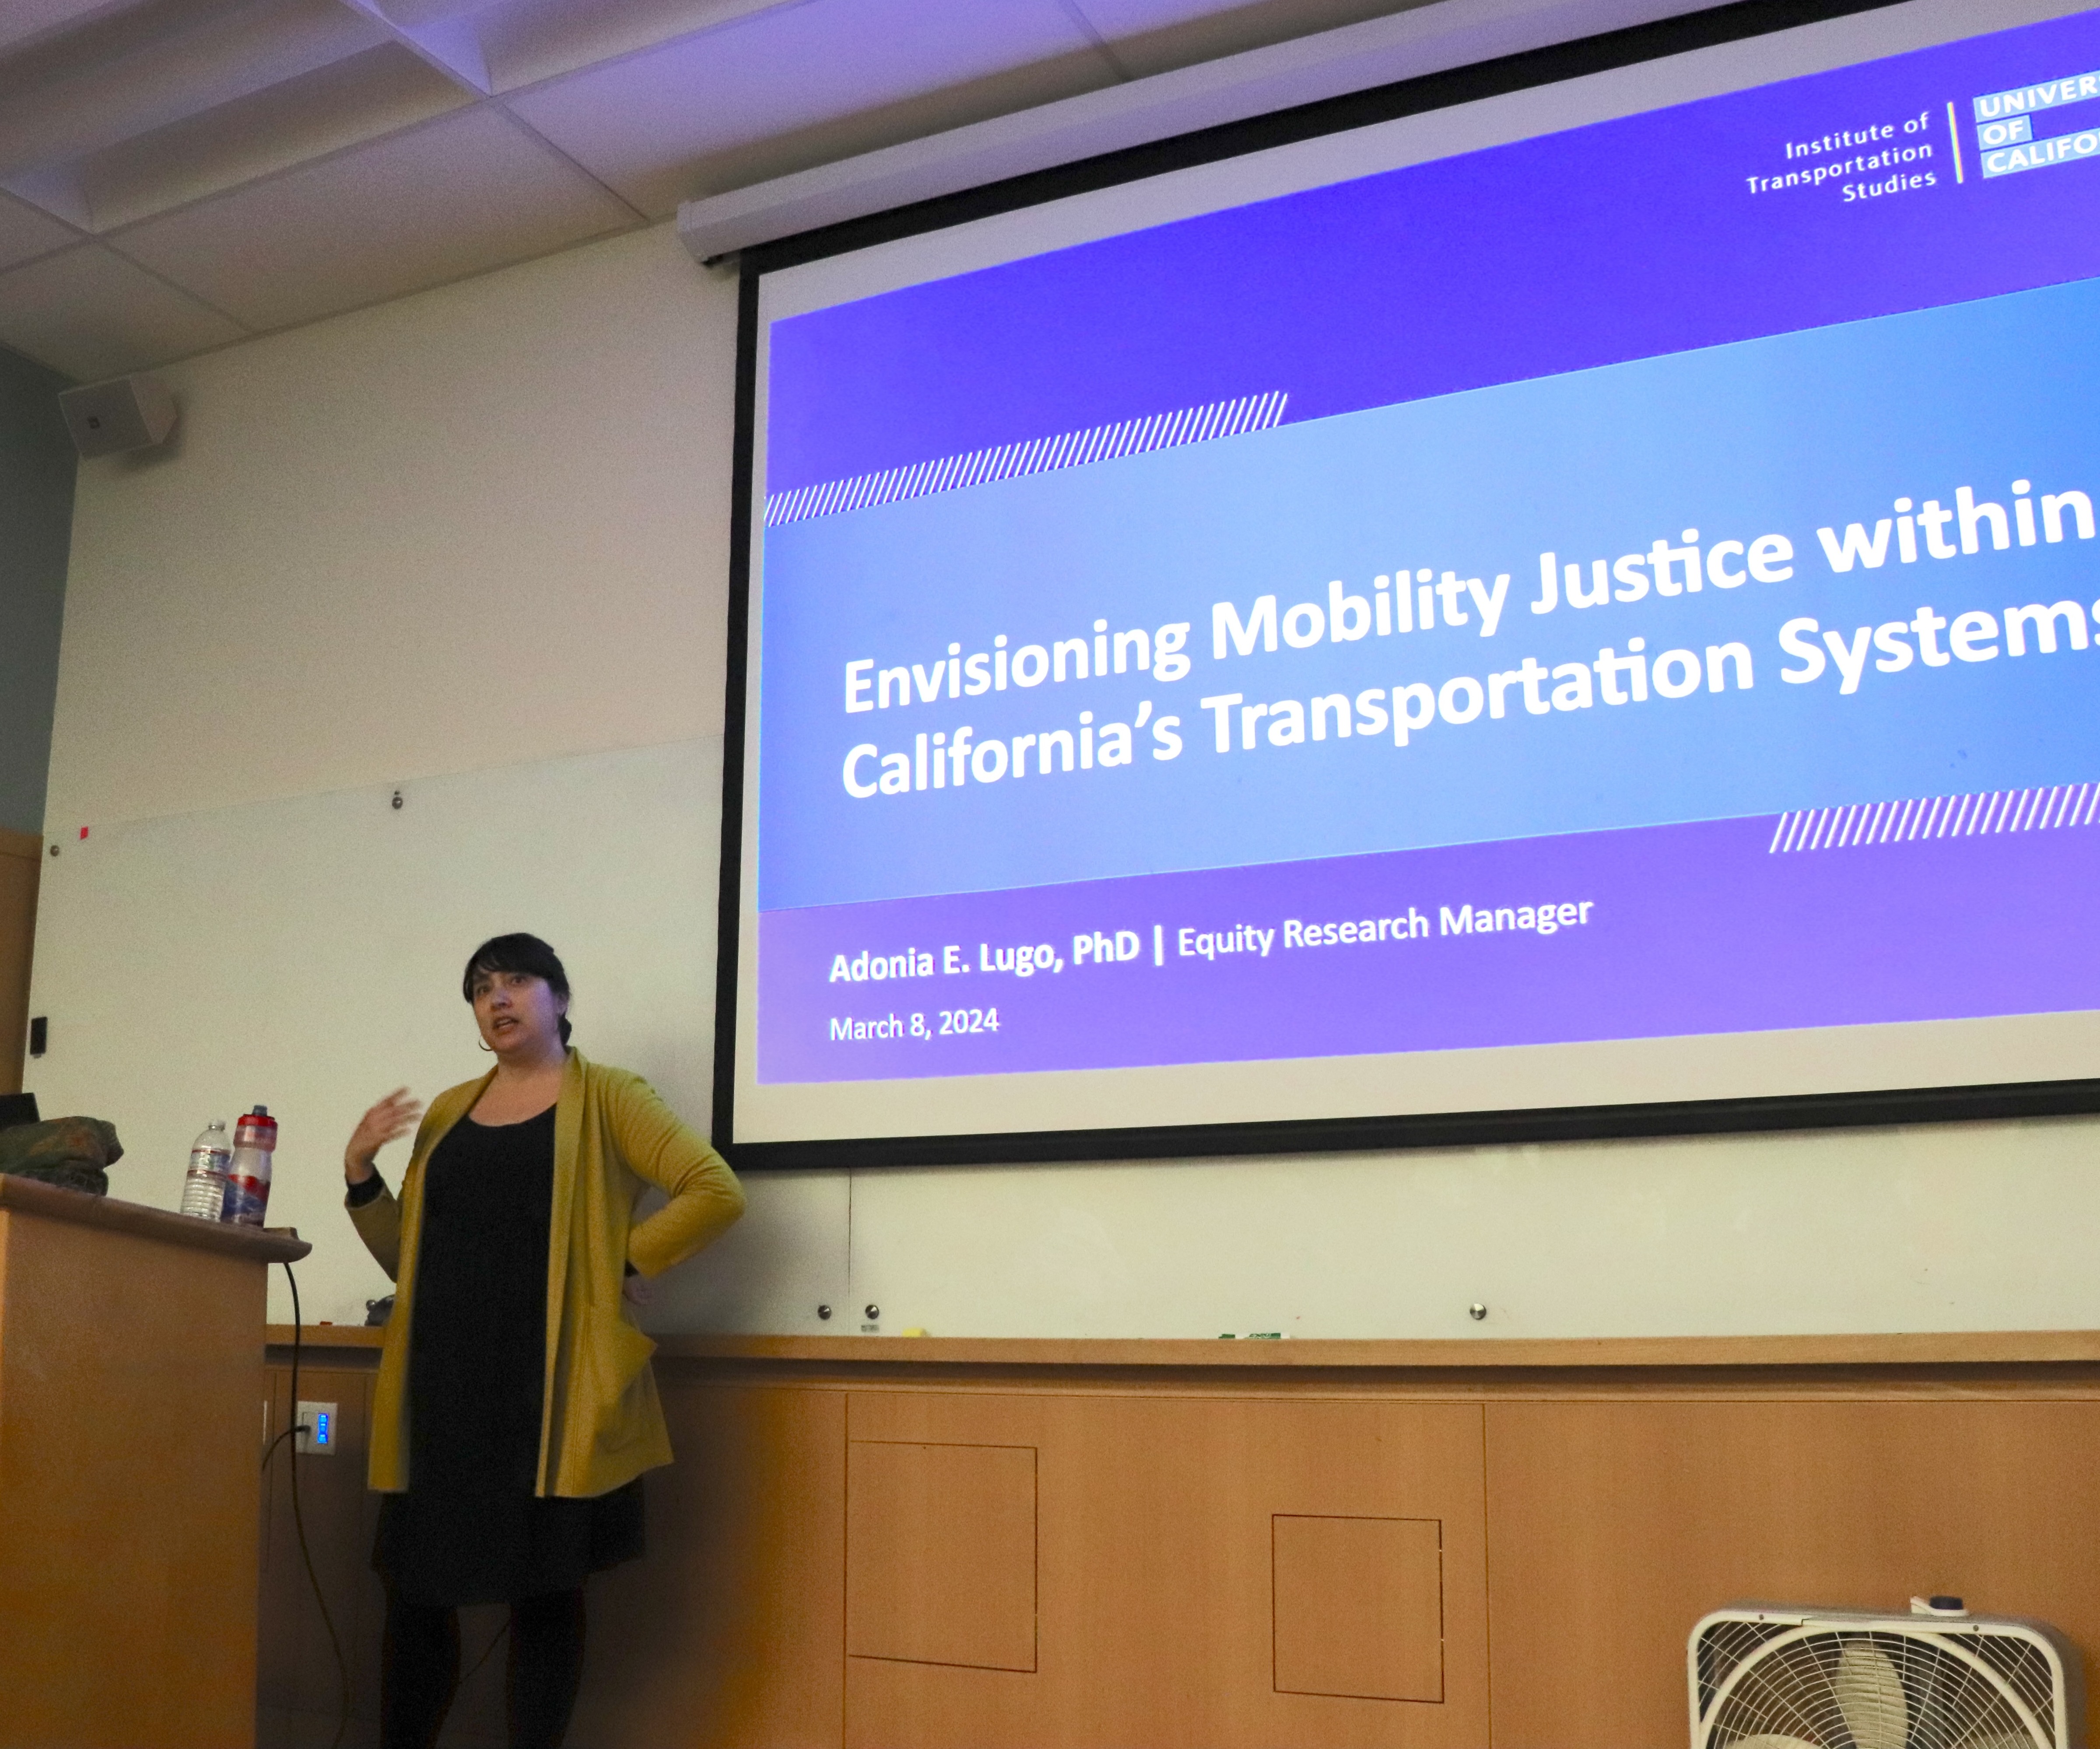 Adonia Lugo, Equity Research Manager at University of California Institute of Transportation Studies/ITS UCLA, presents at the ITS Transportation Seminar